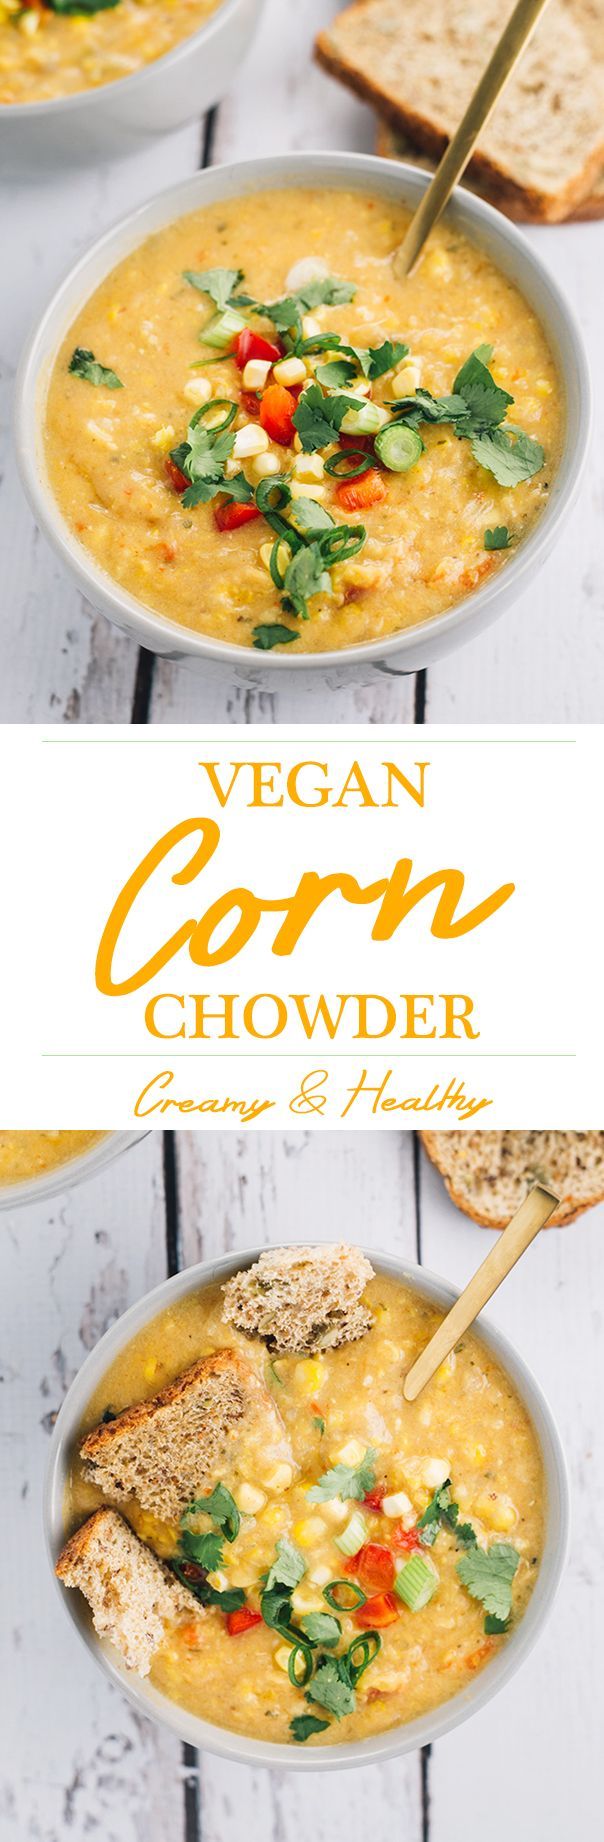 Creamy Vegan Corn Chowder – a quick, simple and healthy soup made with corn, potatoes, celery and red pepper.